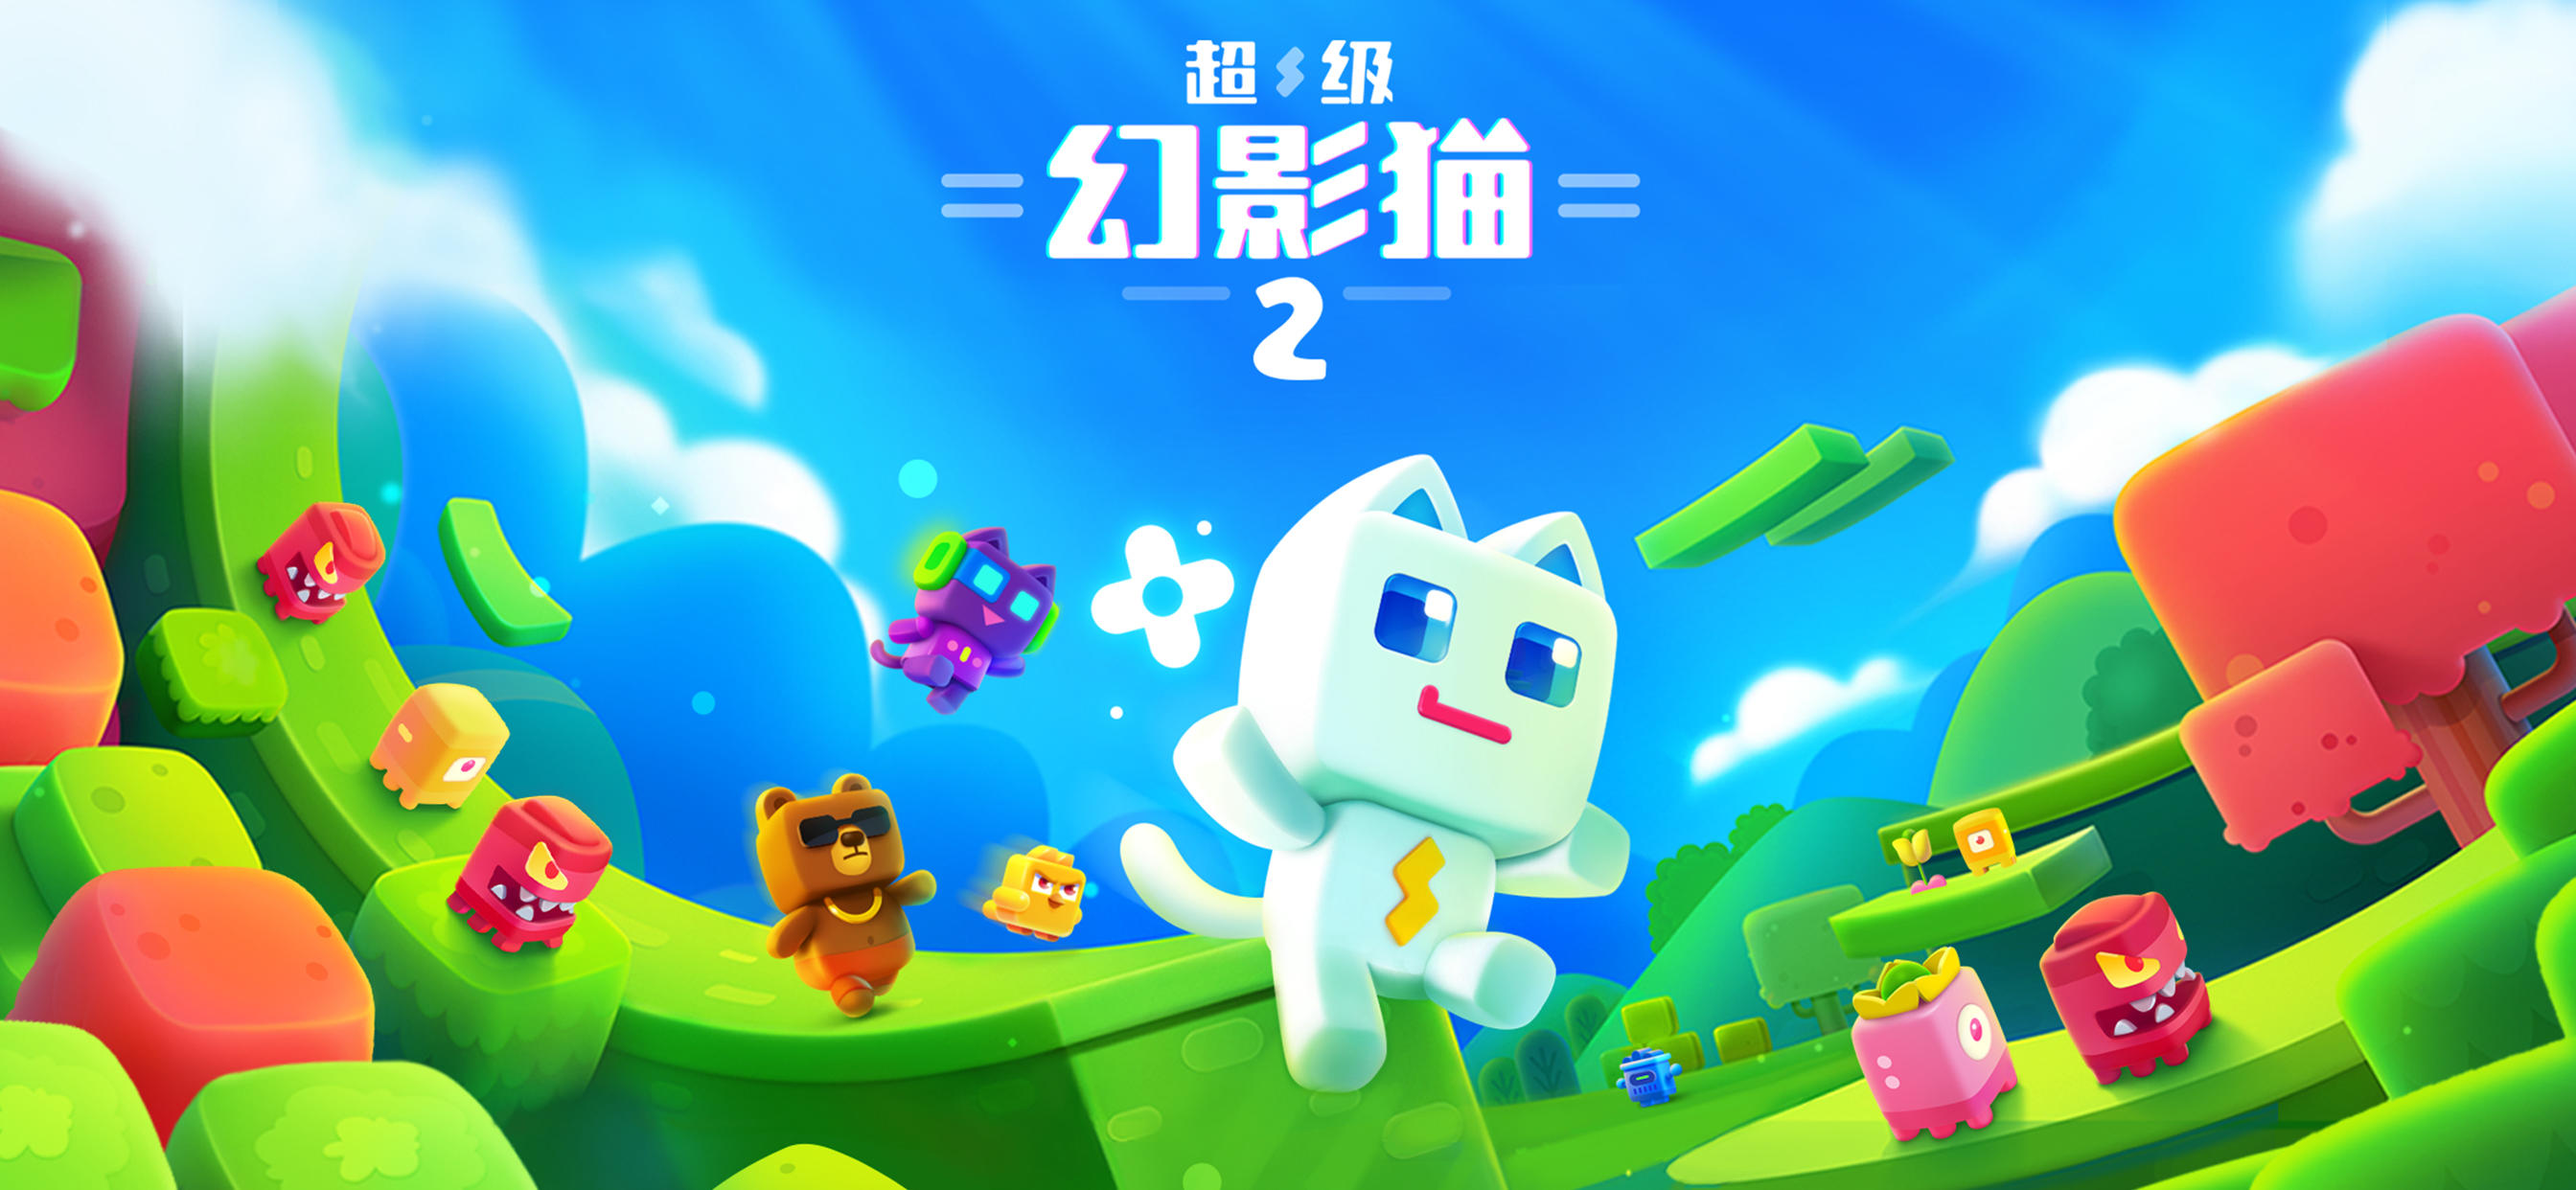 Super Phantom Cat APK Download for Android Free